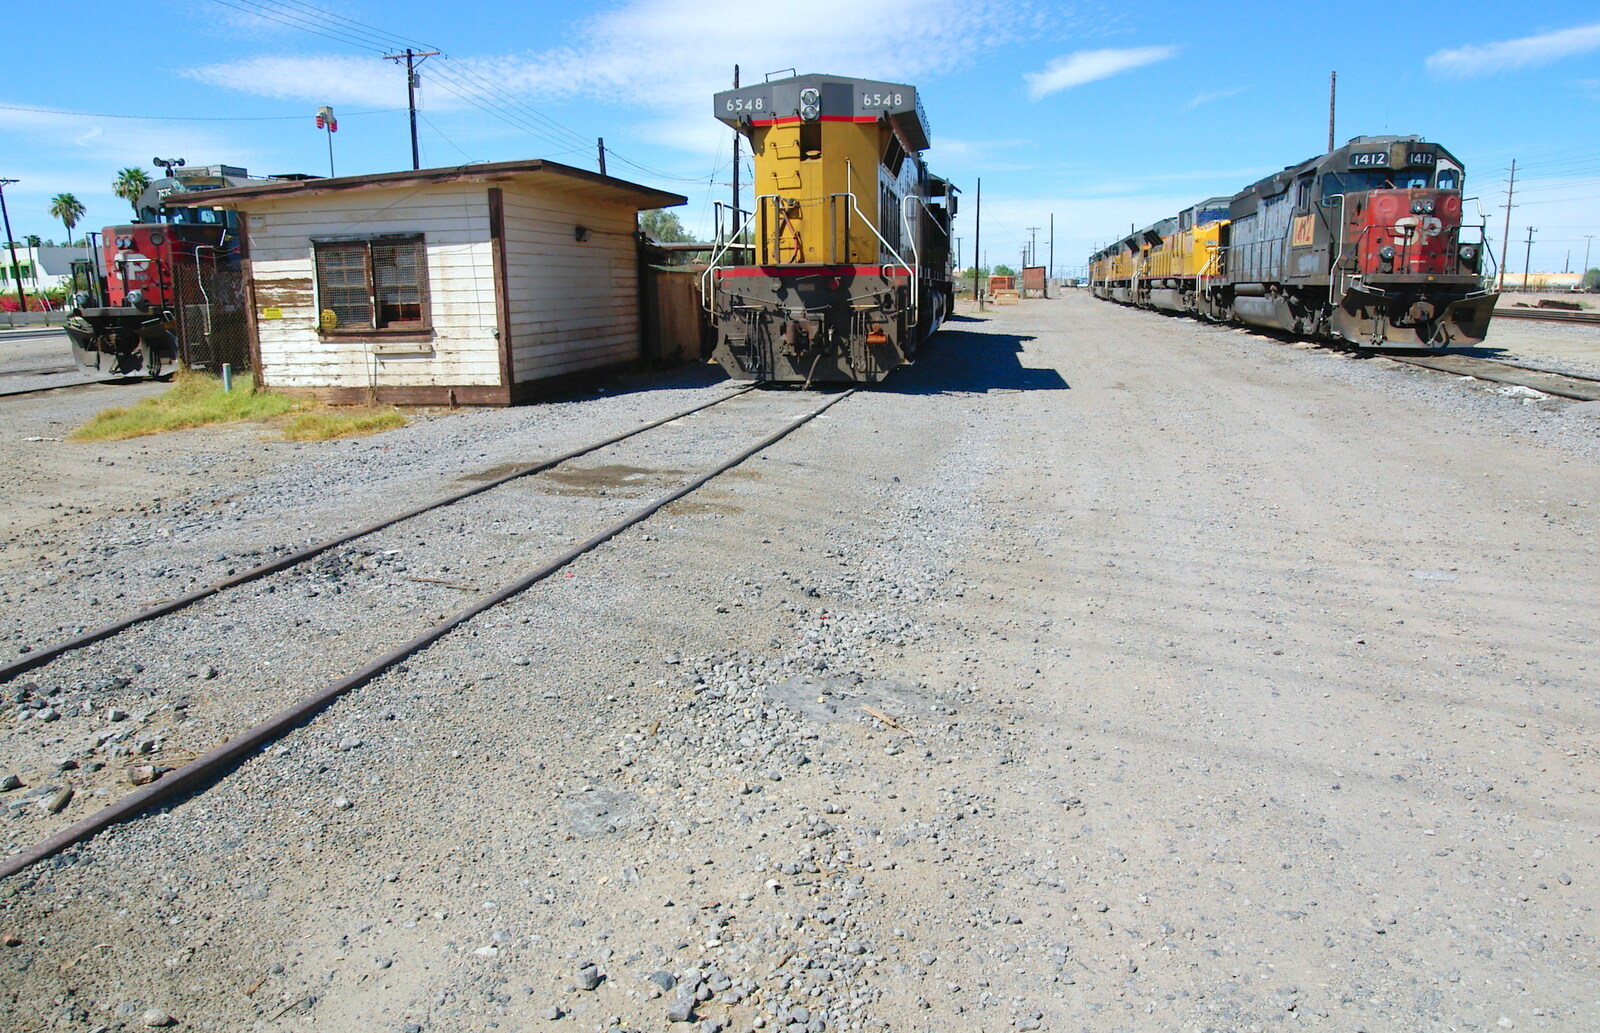 More dusty rail-yard action from California Desert: El Centro, Imperial Valley, California, US - 24th September 2005